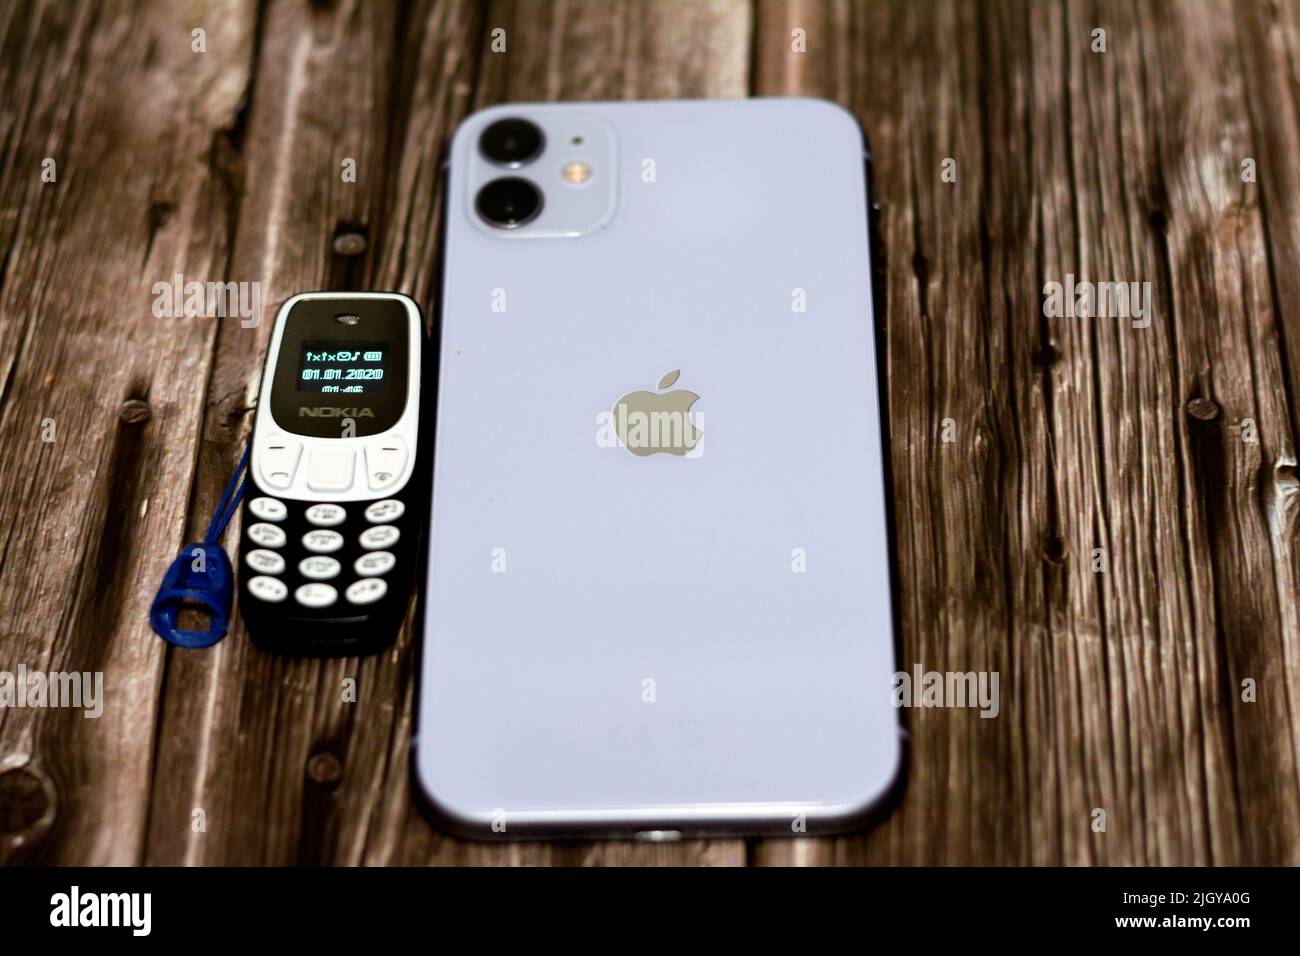 Cairo, Egypt, June 11 2022: Apple iPhone 11 with 6.1inch Liquid Retina HD High definition display and a tiny small old mini Nokia cell phone with a ke Stock Photo